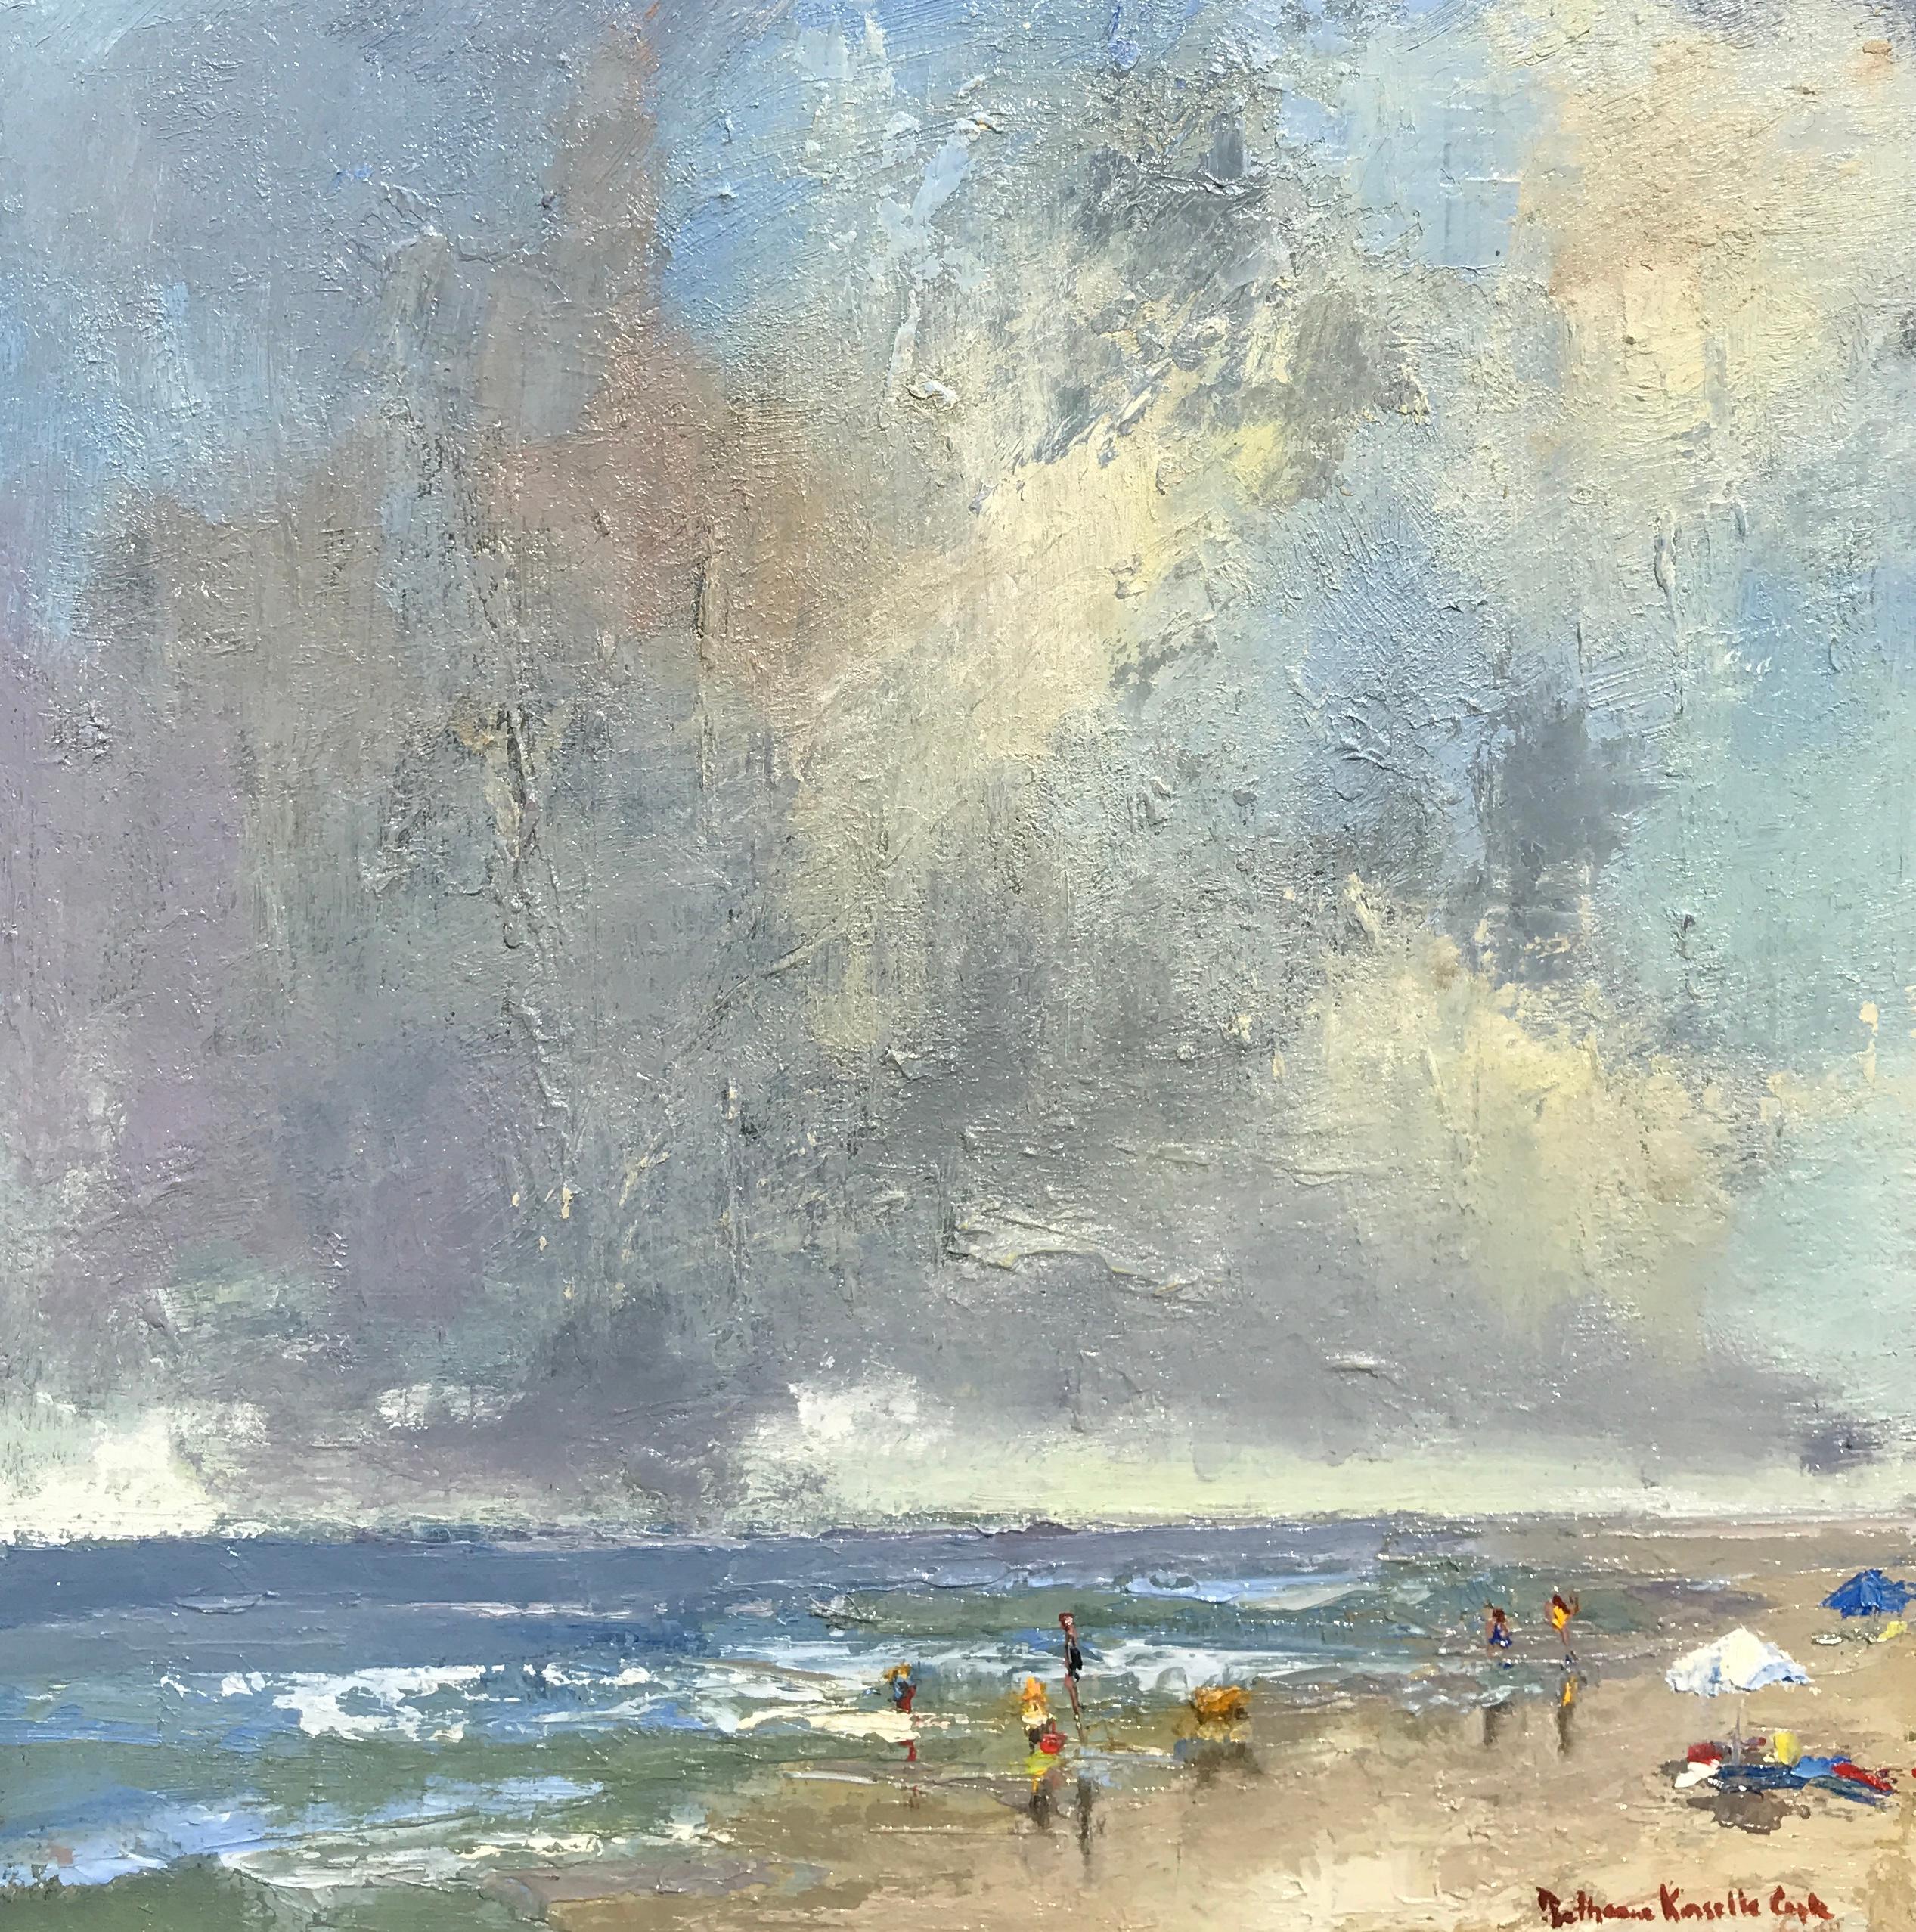 Bethanne Kinsella Cople Landscape Painting - The Spry Arms of the Wind by Bethanne Cople, Small Beach Oil on Board Painting